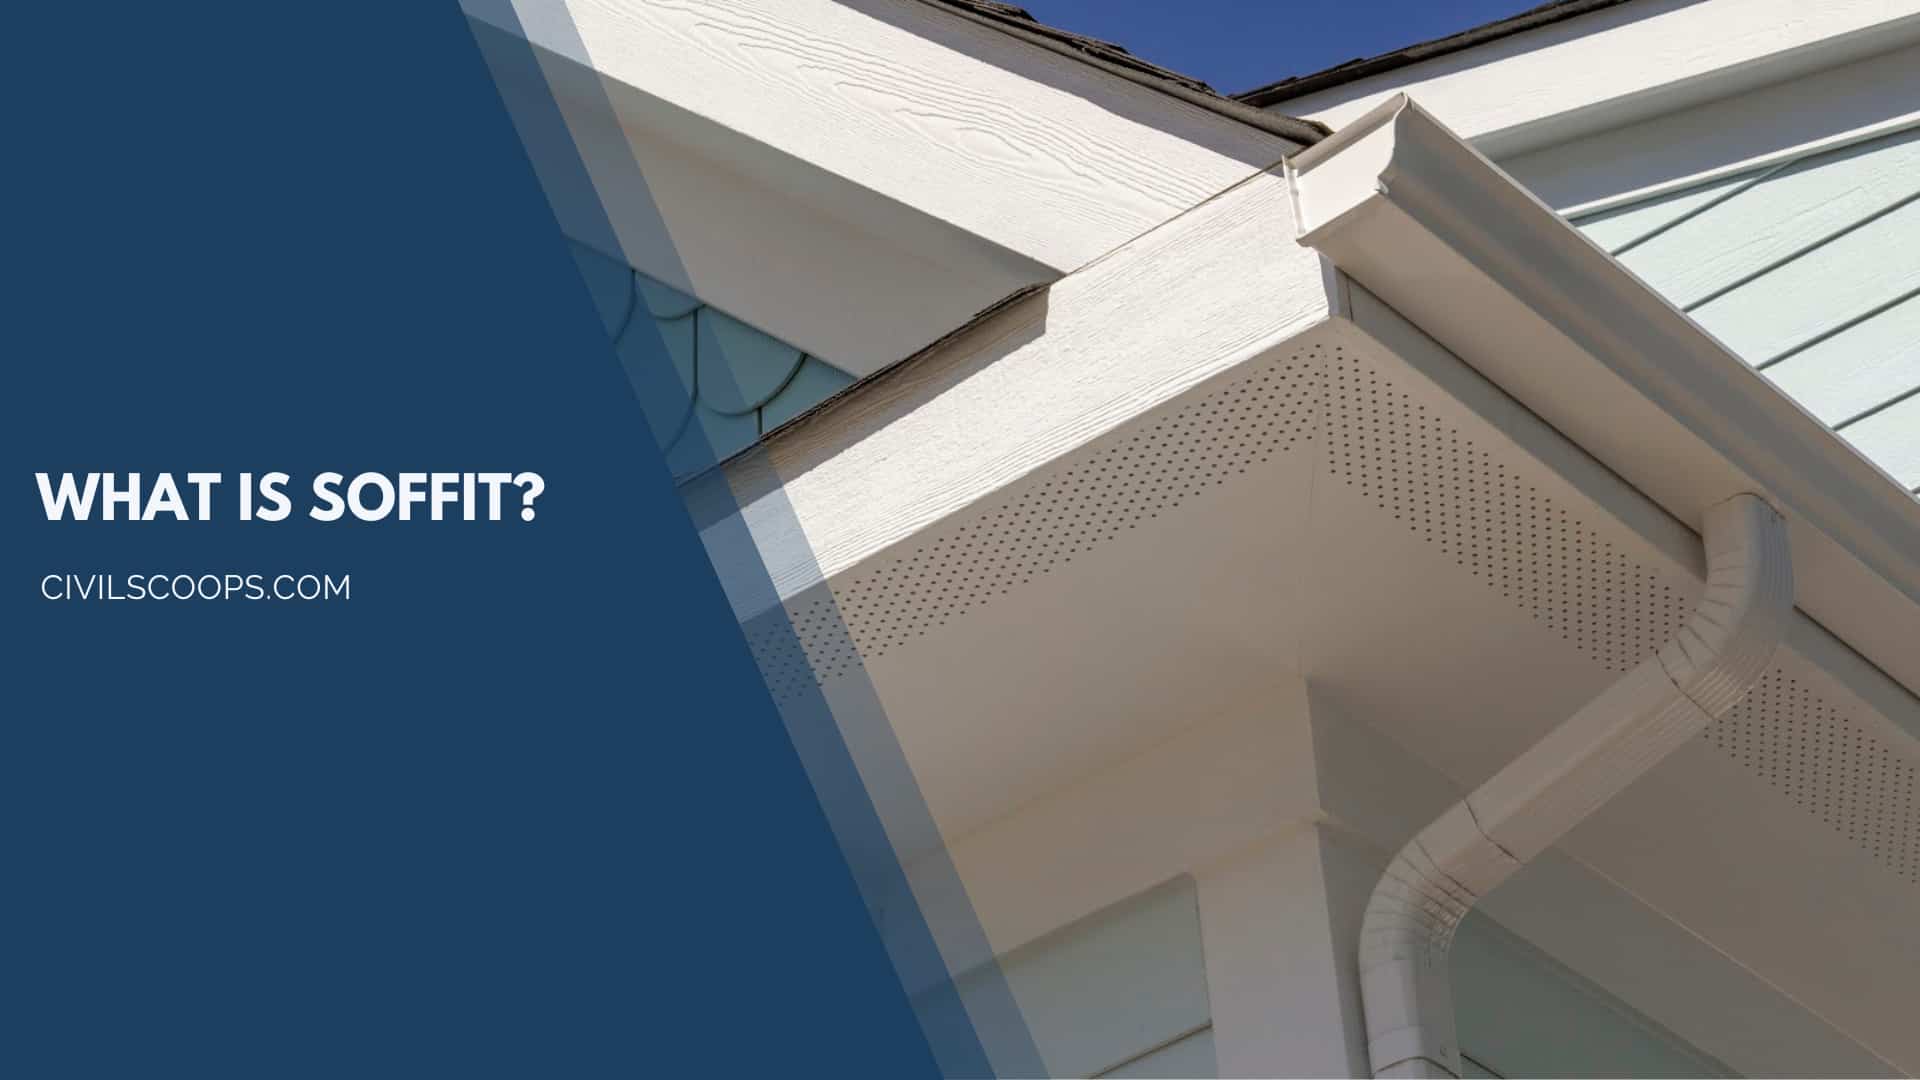 What Is Soffit?